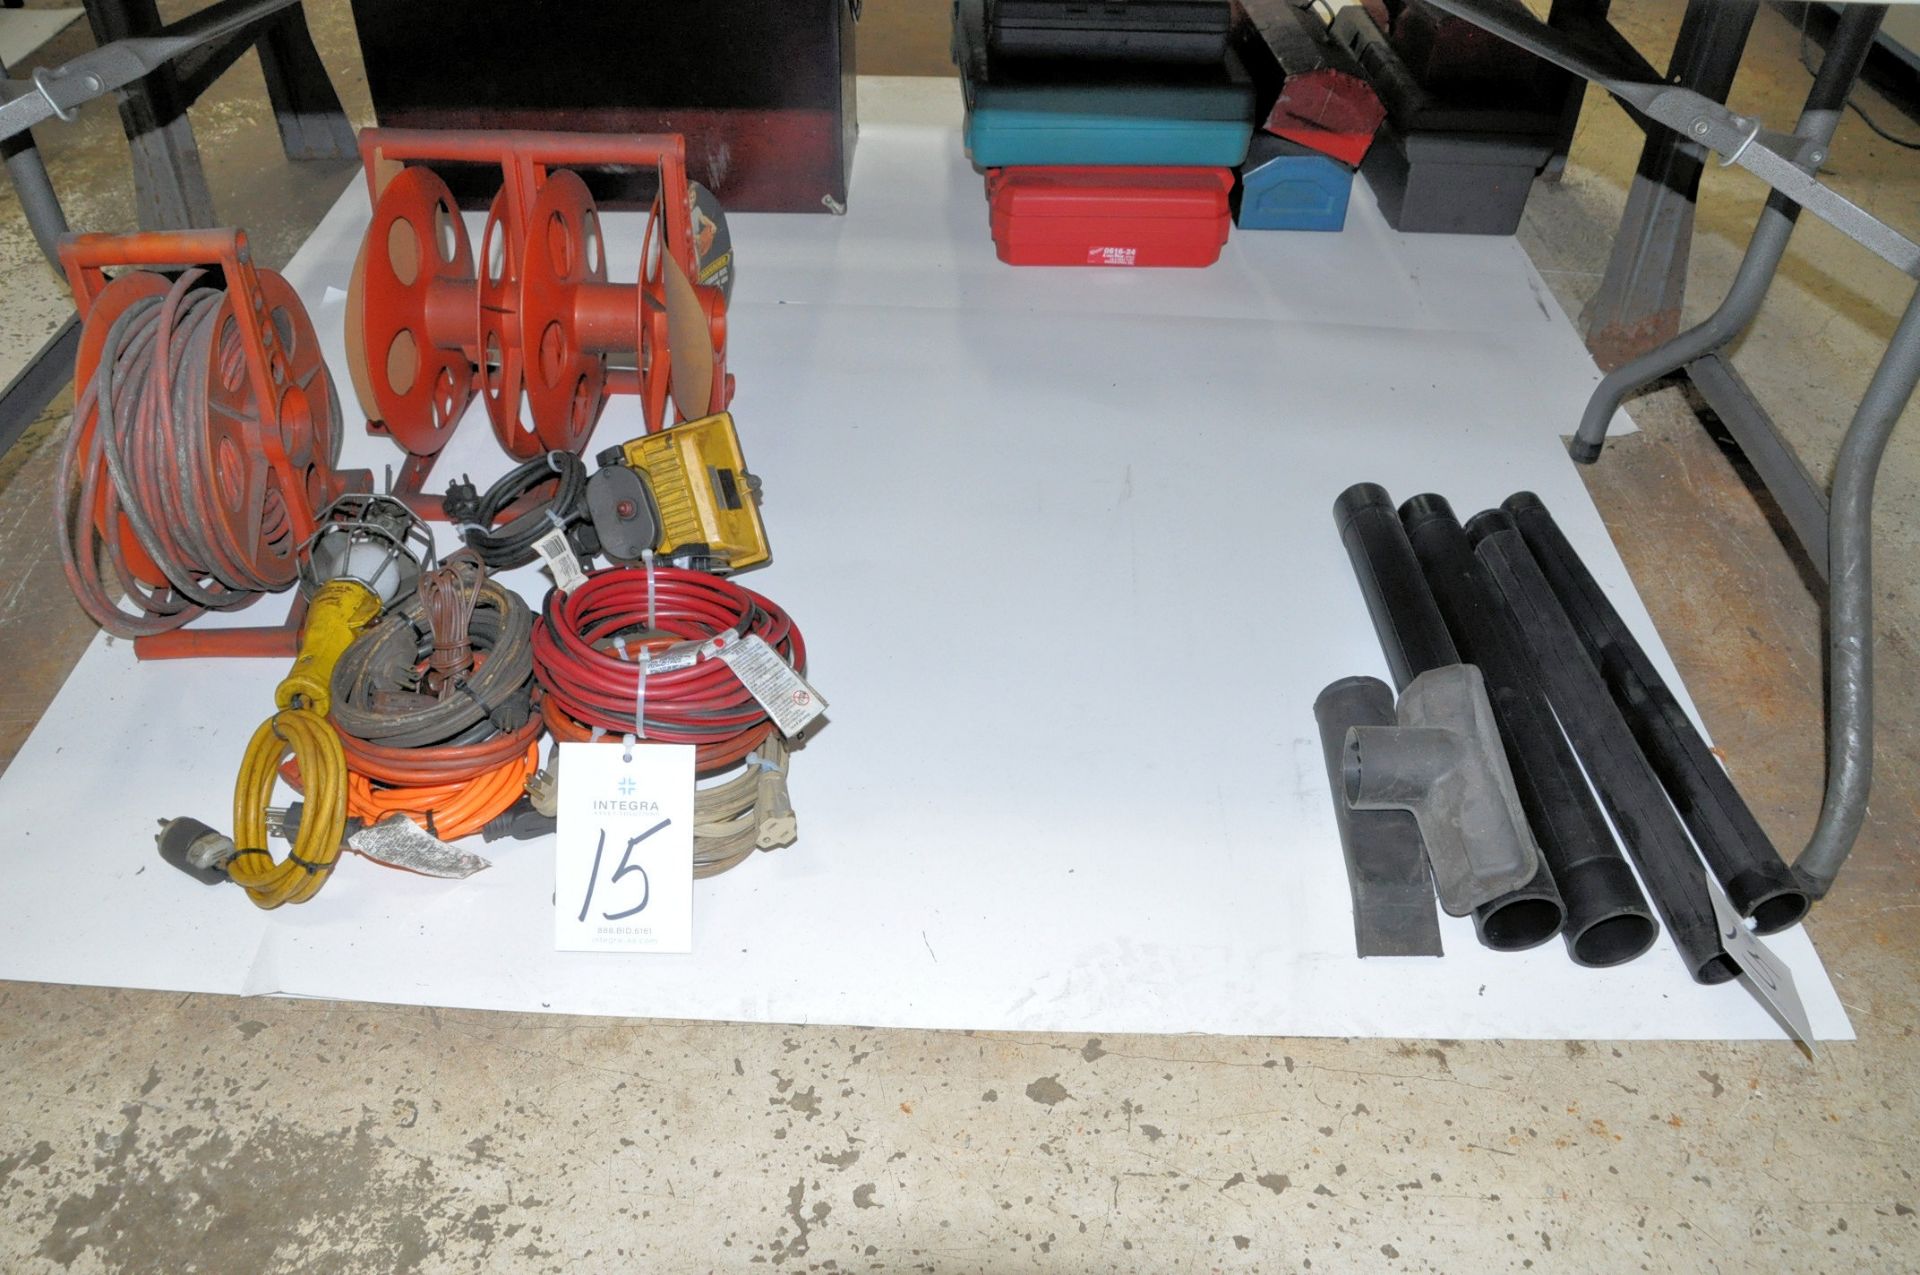 Lot-Extension Cords, Portable Work Light and Shop Vac Accessories